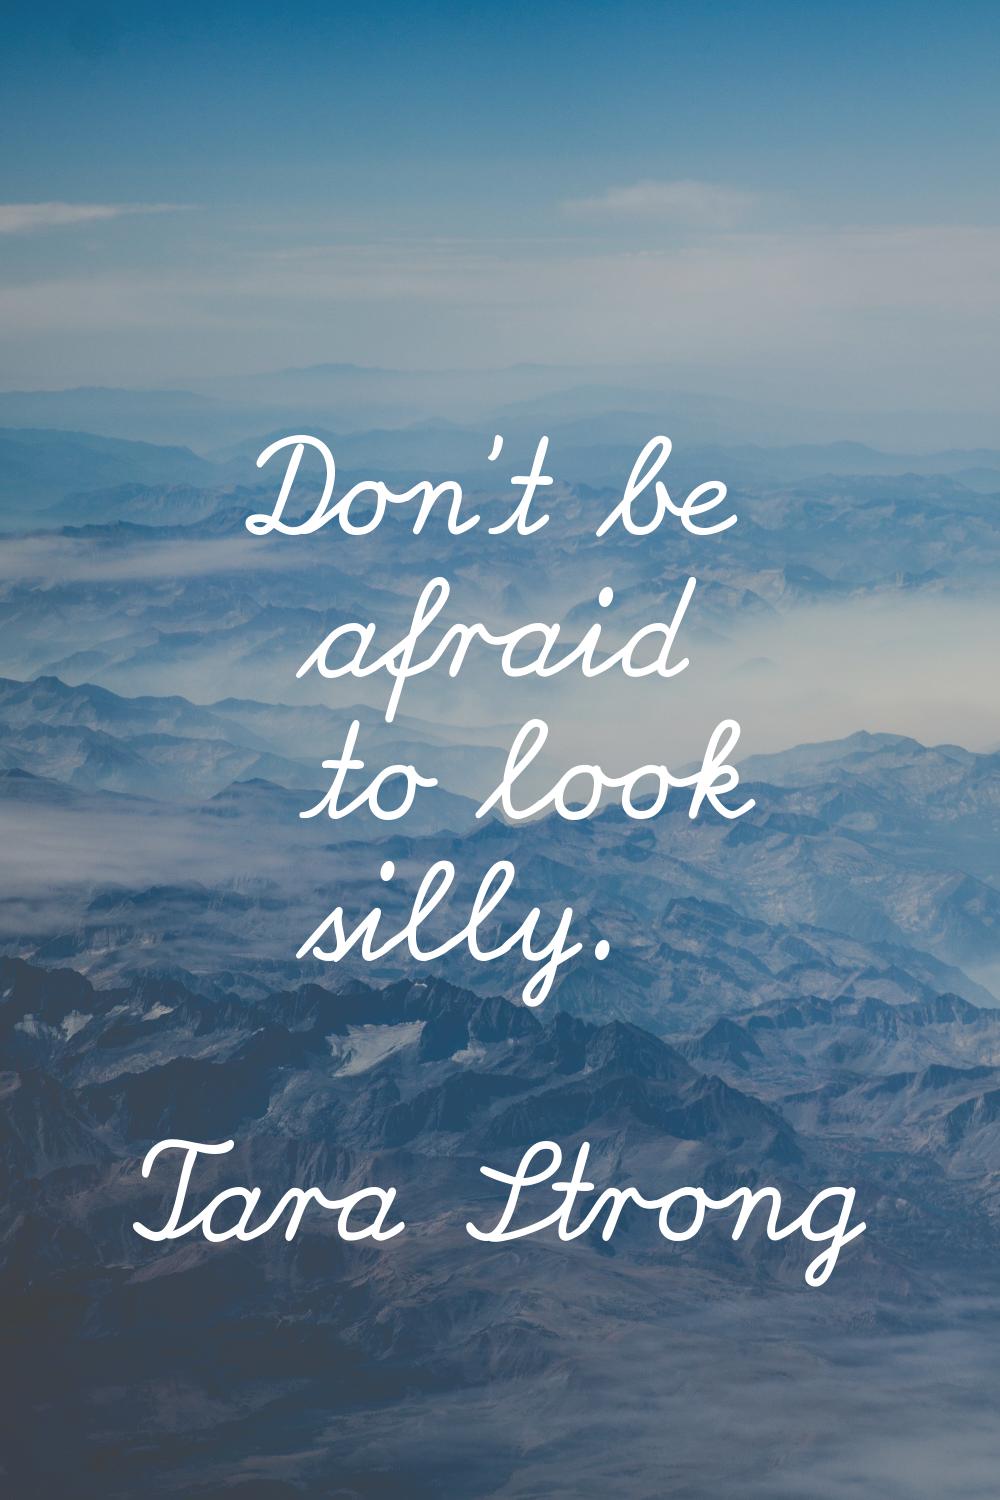 Don't be afraid to look silly.